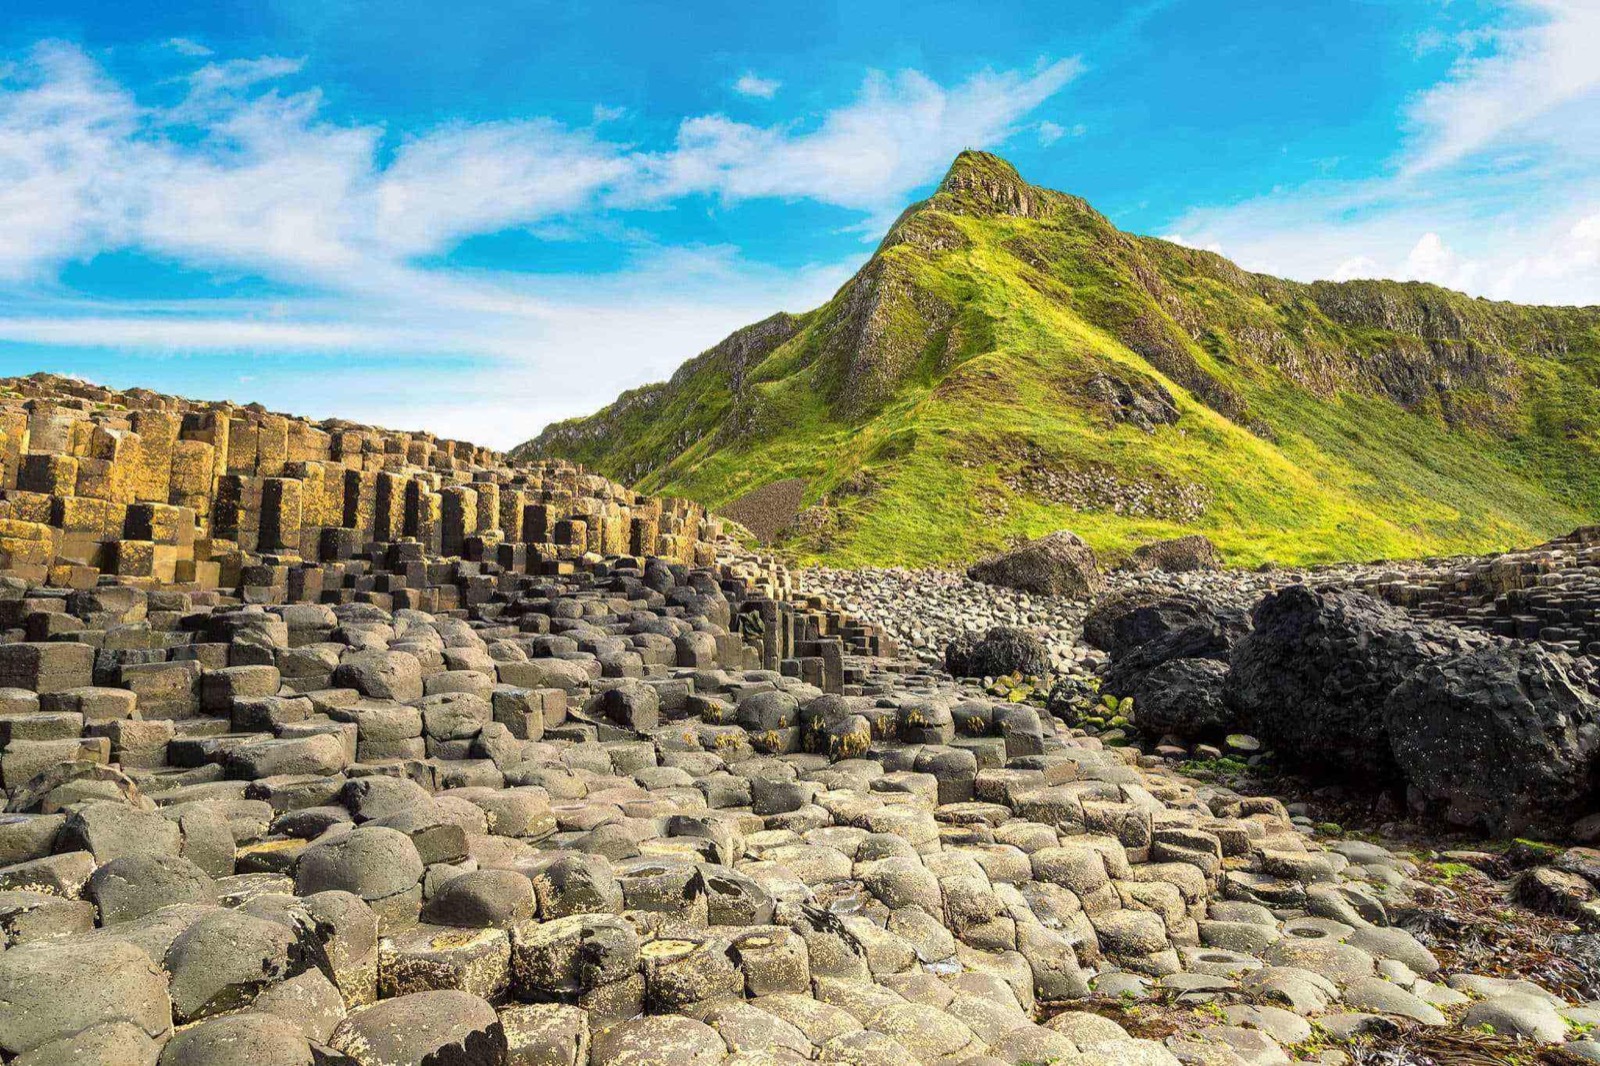 Can You Match These Extraordinary Natural Features to Their Respective Countries? Giant's Causeway, Northern Ireland, United Kingdom